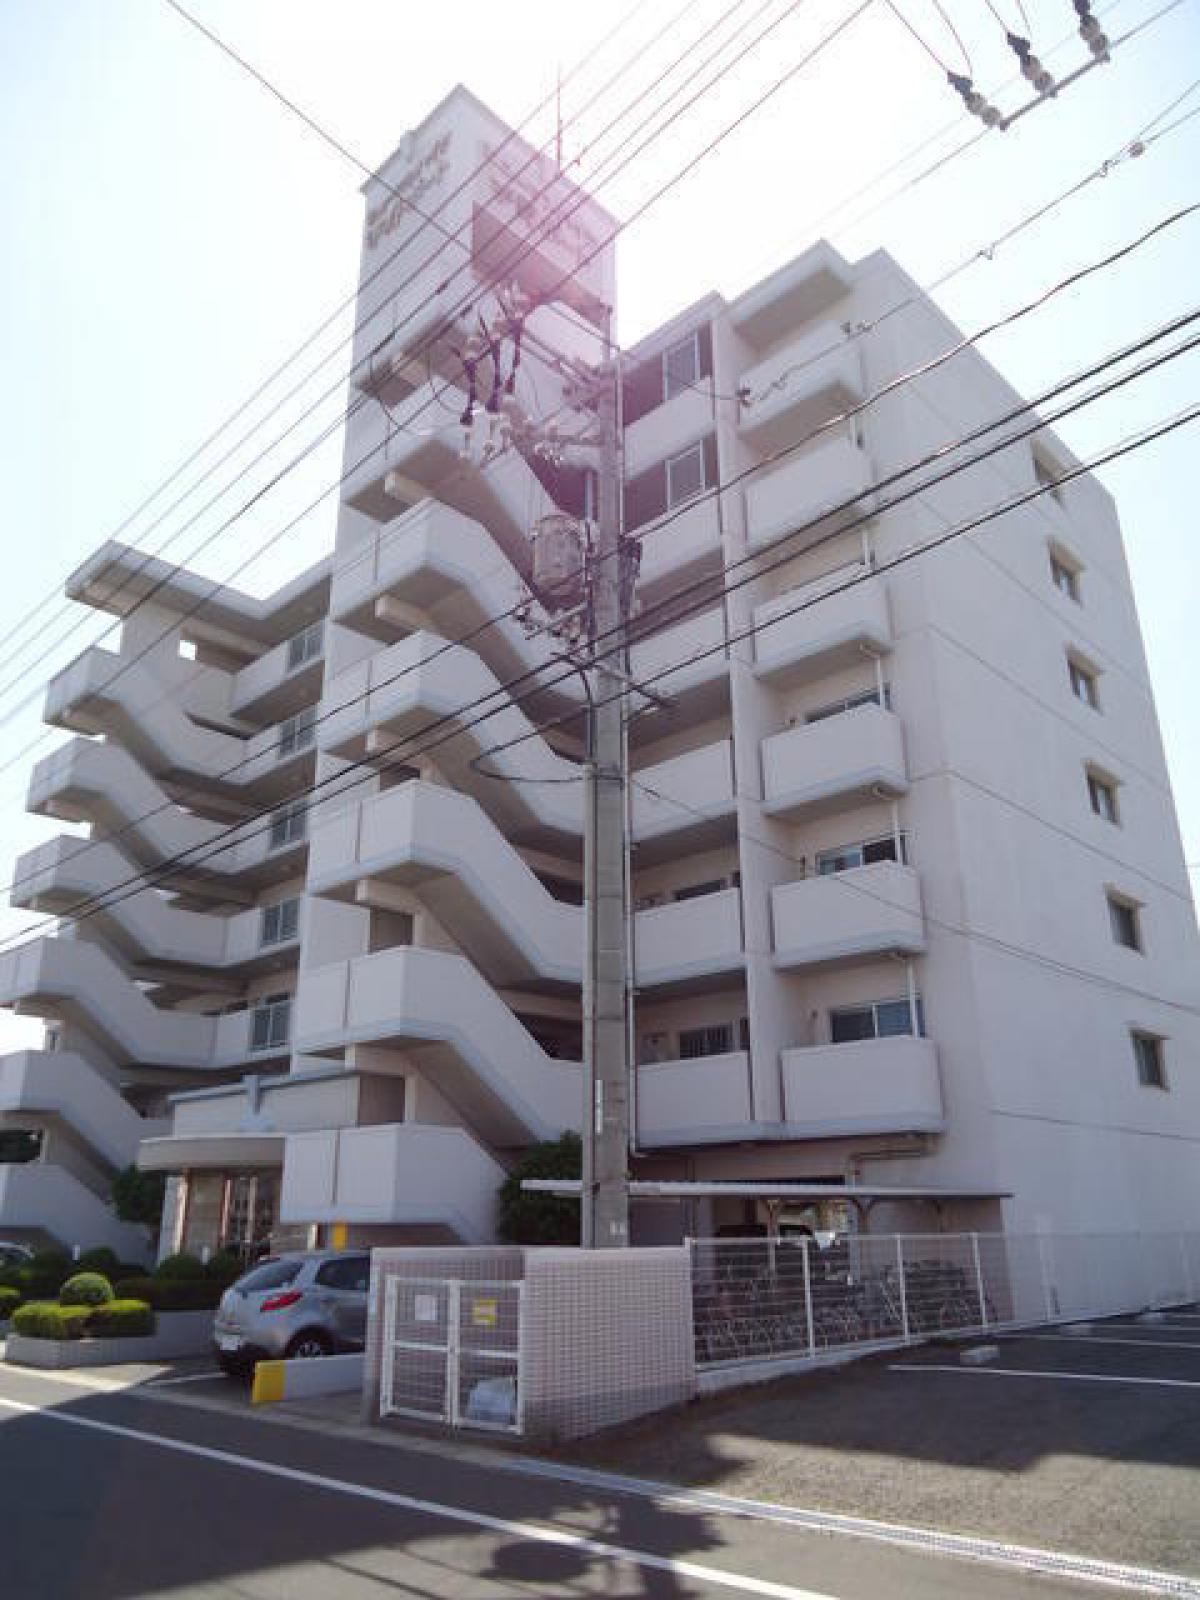 Picture of Apartment For Sale in Tamano Shi, Okayama, Japan